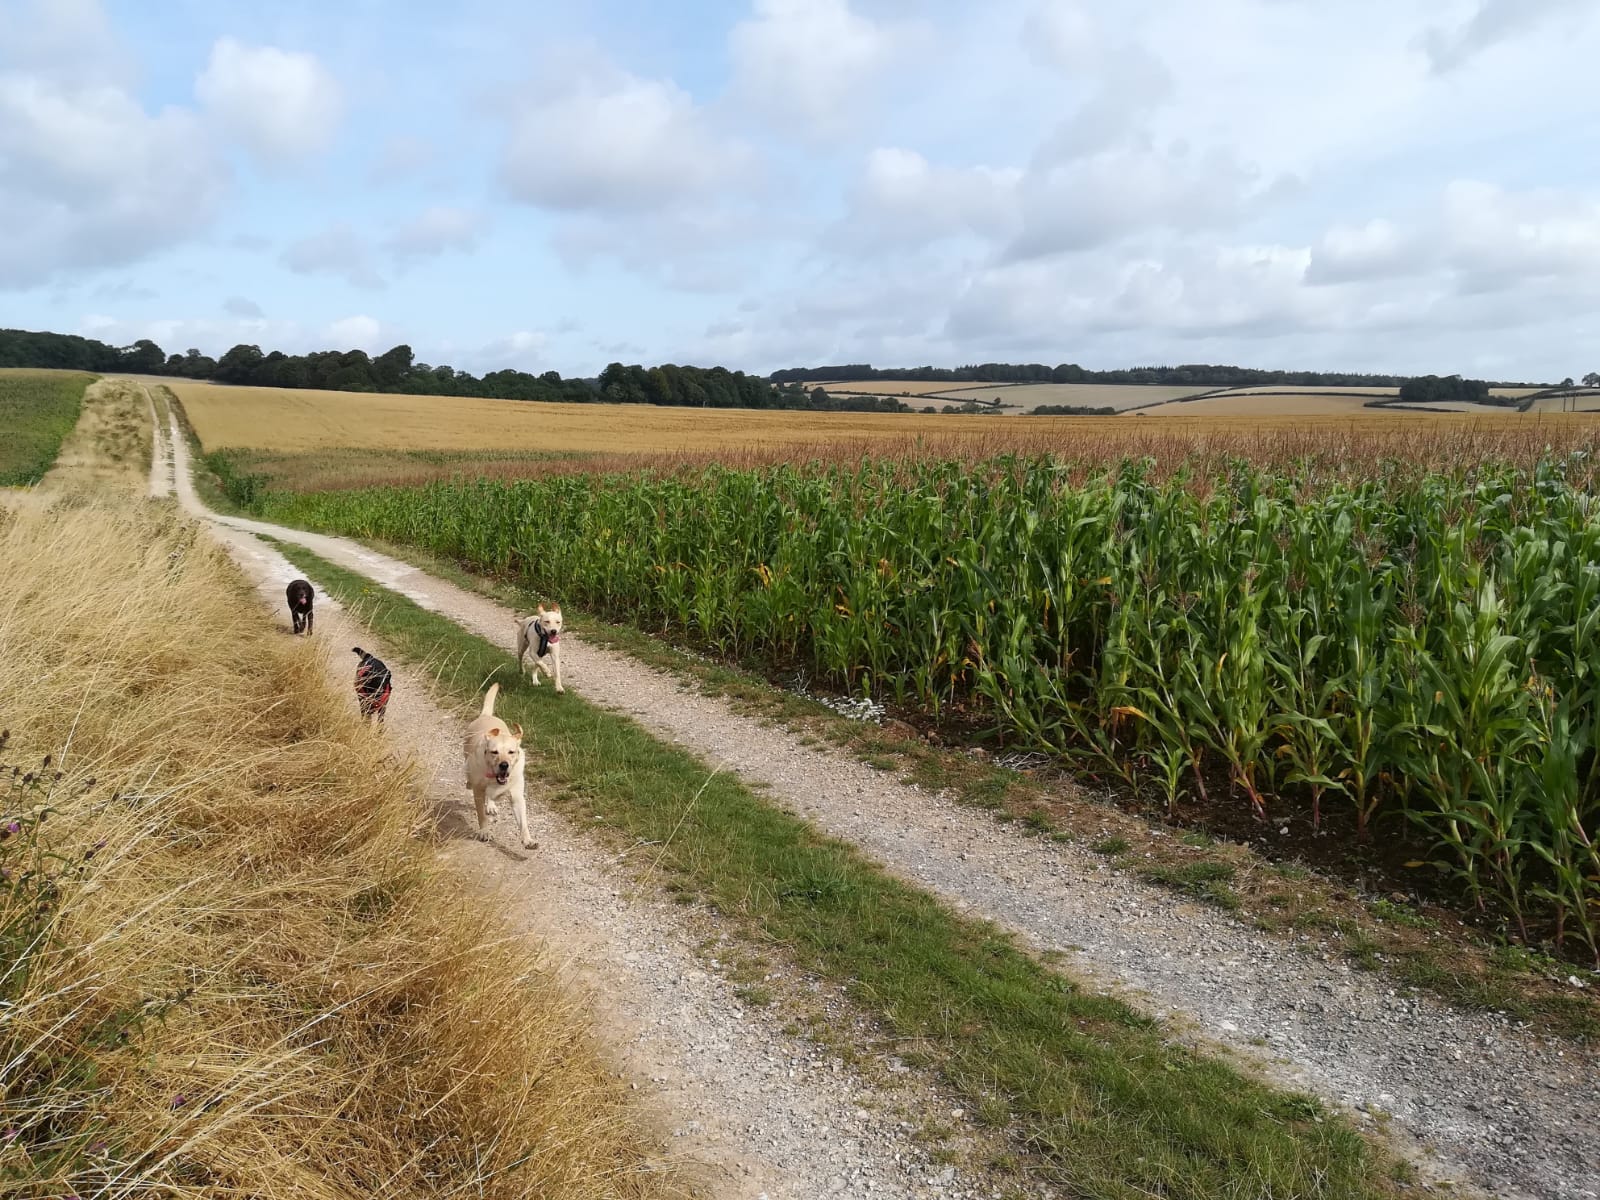 Dogs running through a field on a track